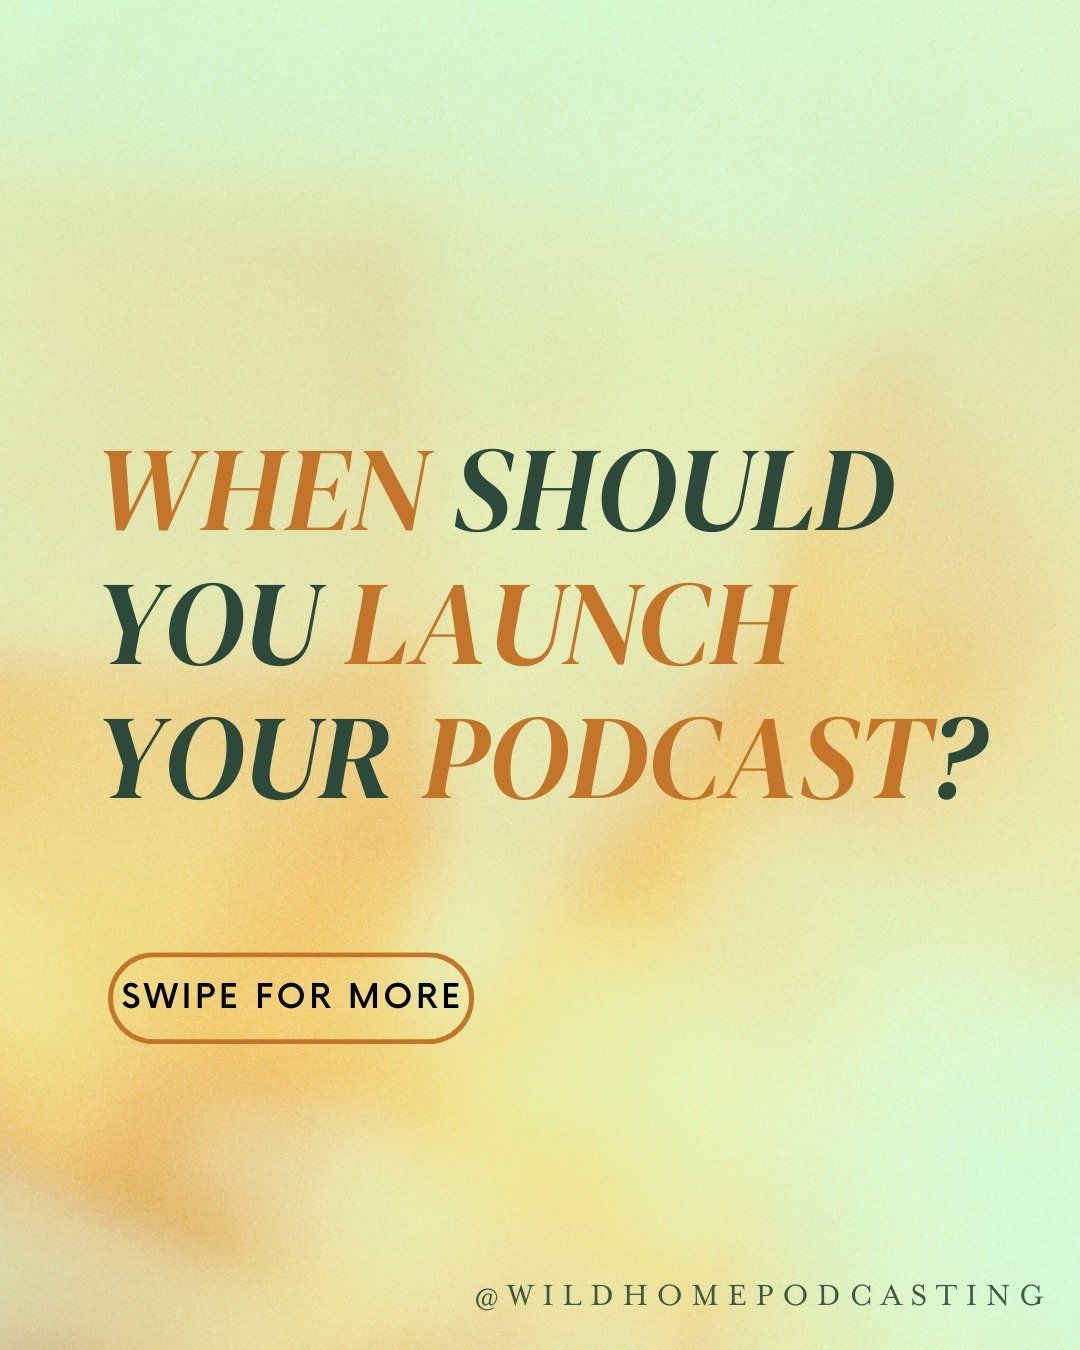 When should you launch your podcast? NOW⁠
⁠
No, but seriously. I talk all about this and more in episode 181 of Share, Strategize, &amp; Shine.⁠
⁠
Comment PODCAST for the link.⁠
⁠
Want to dig deeper?⁠
⁠
In the Launch Your Podcast Funnel Workshop, I&r